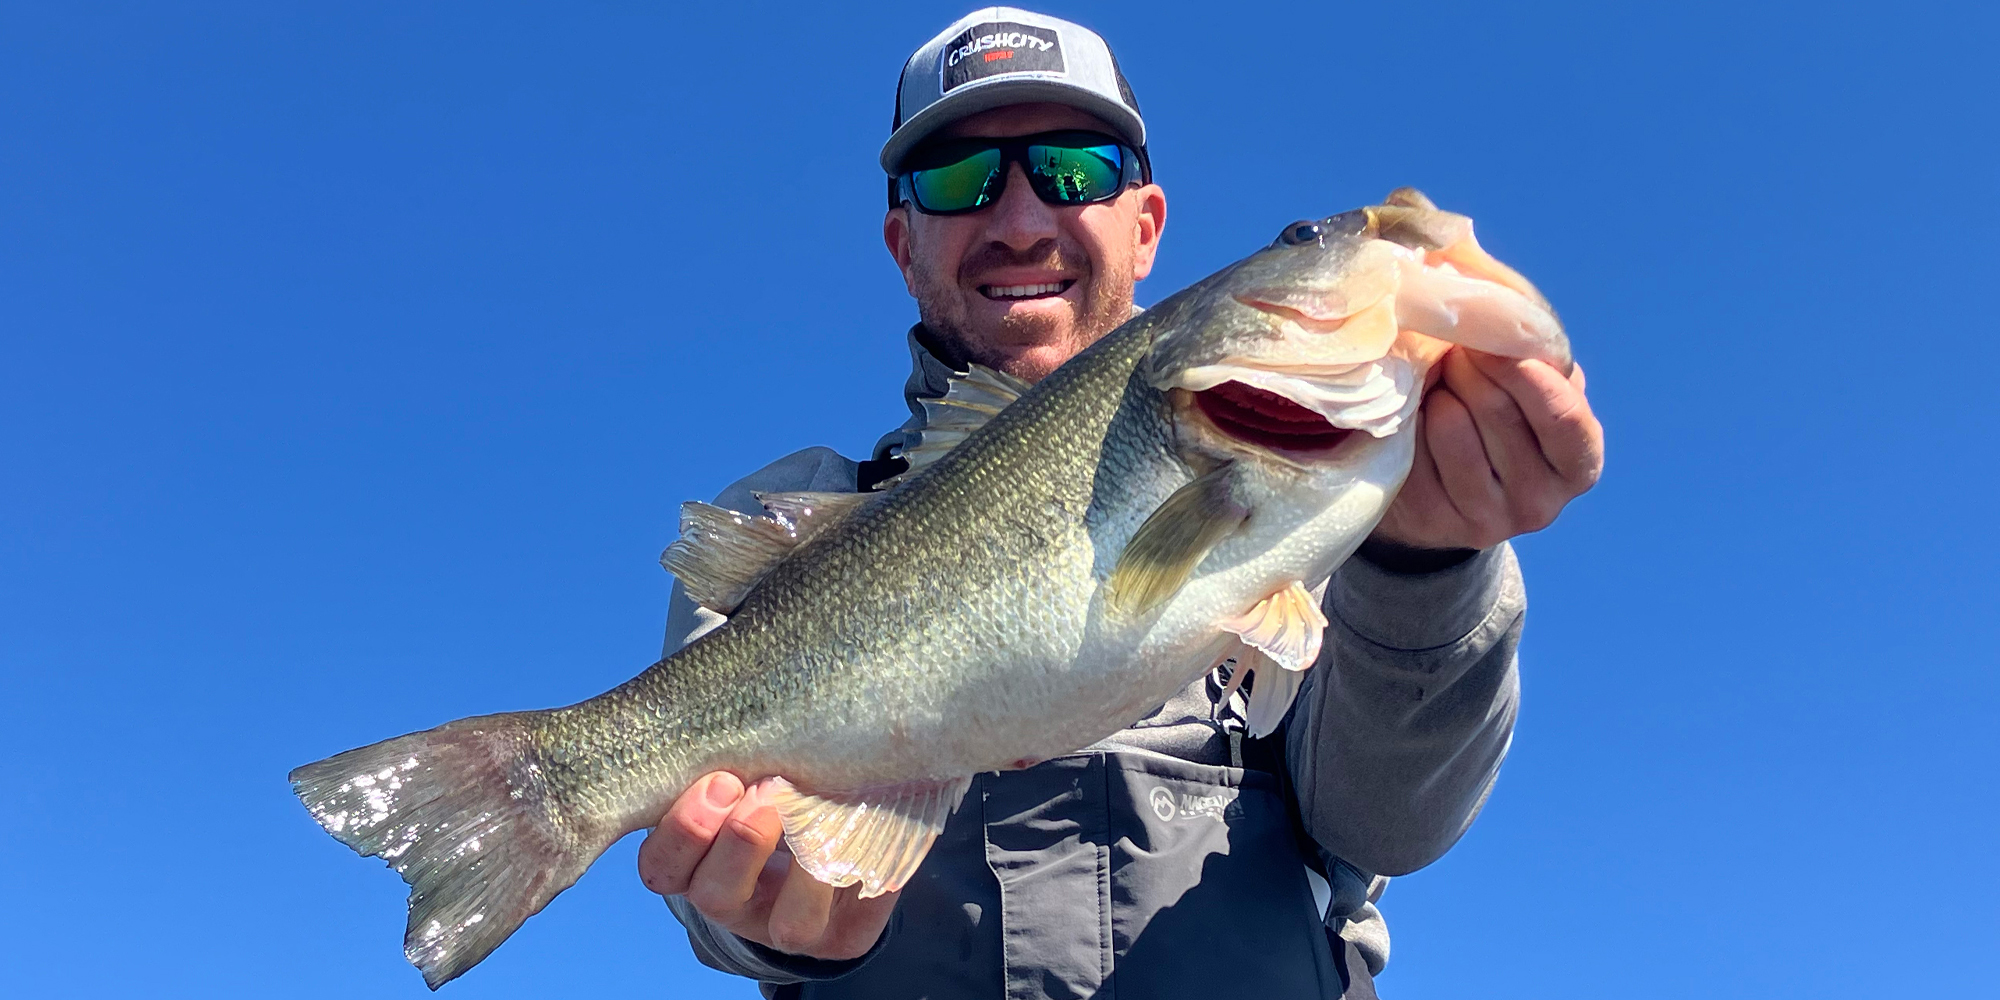 Wheeler back atop leaderboard after breaking 50 pounds on Santee